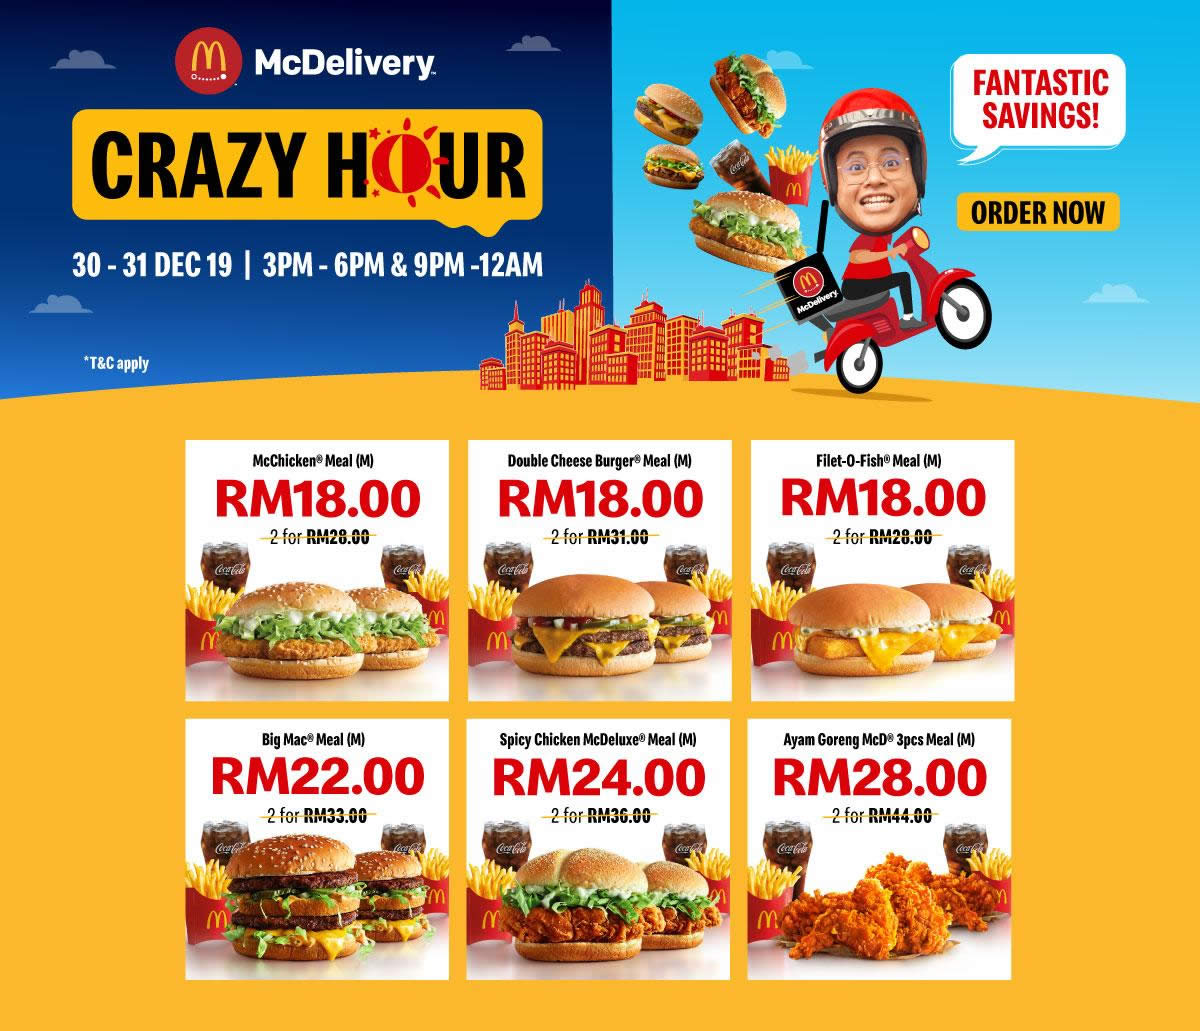 Mcdelivery crazy hour